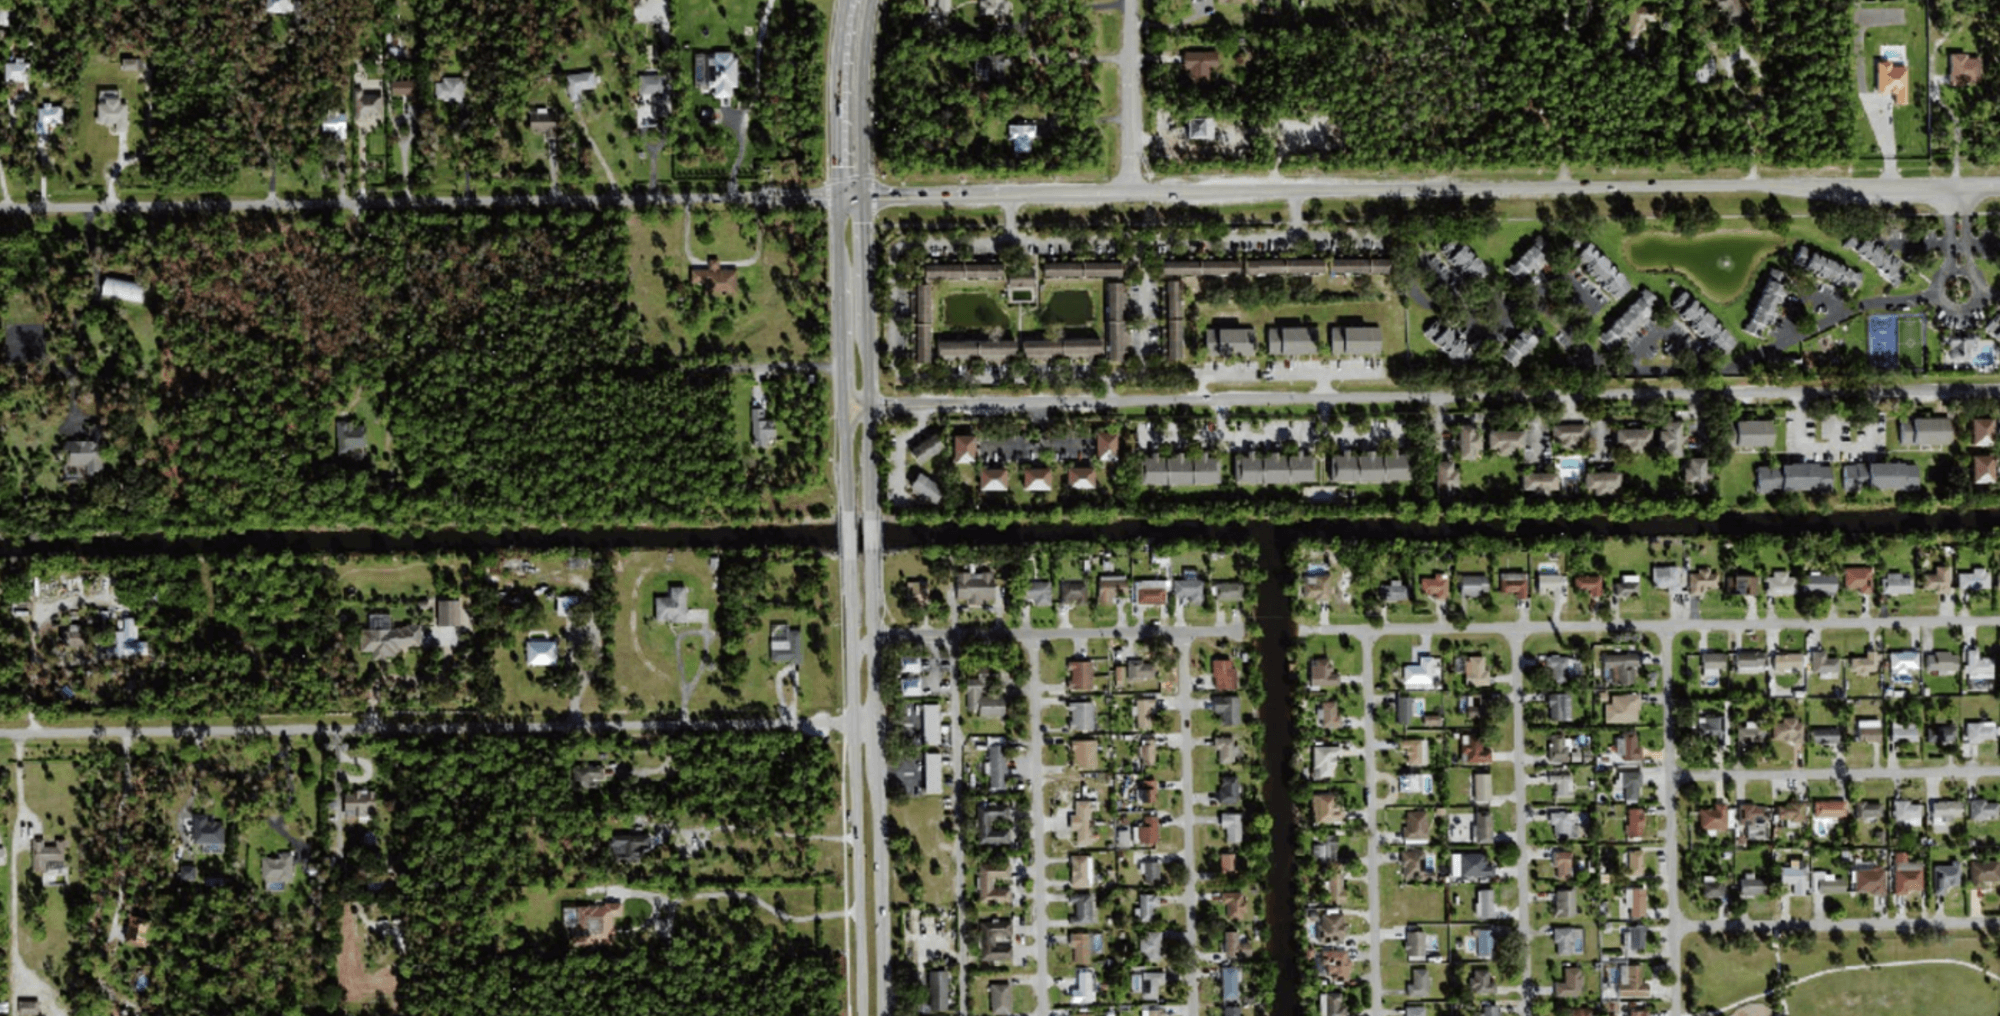 Imagery of Collier County